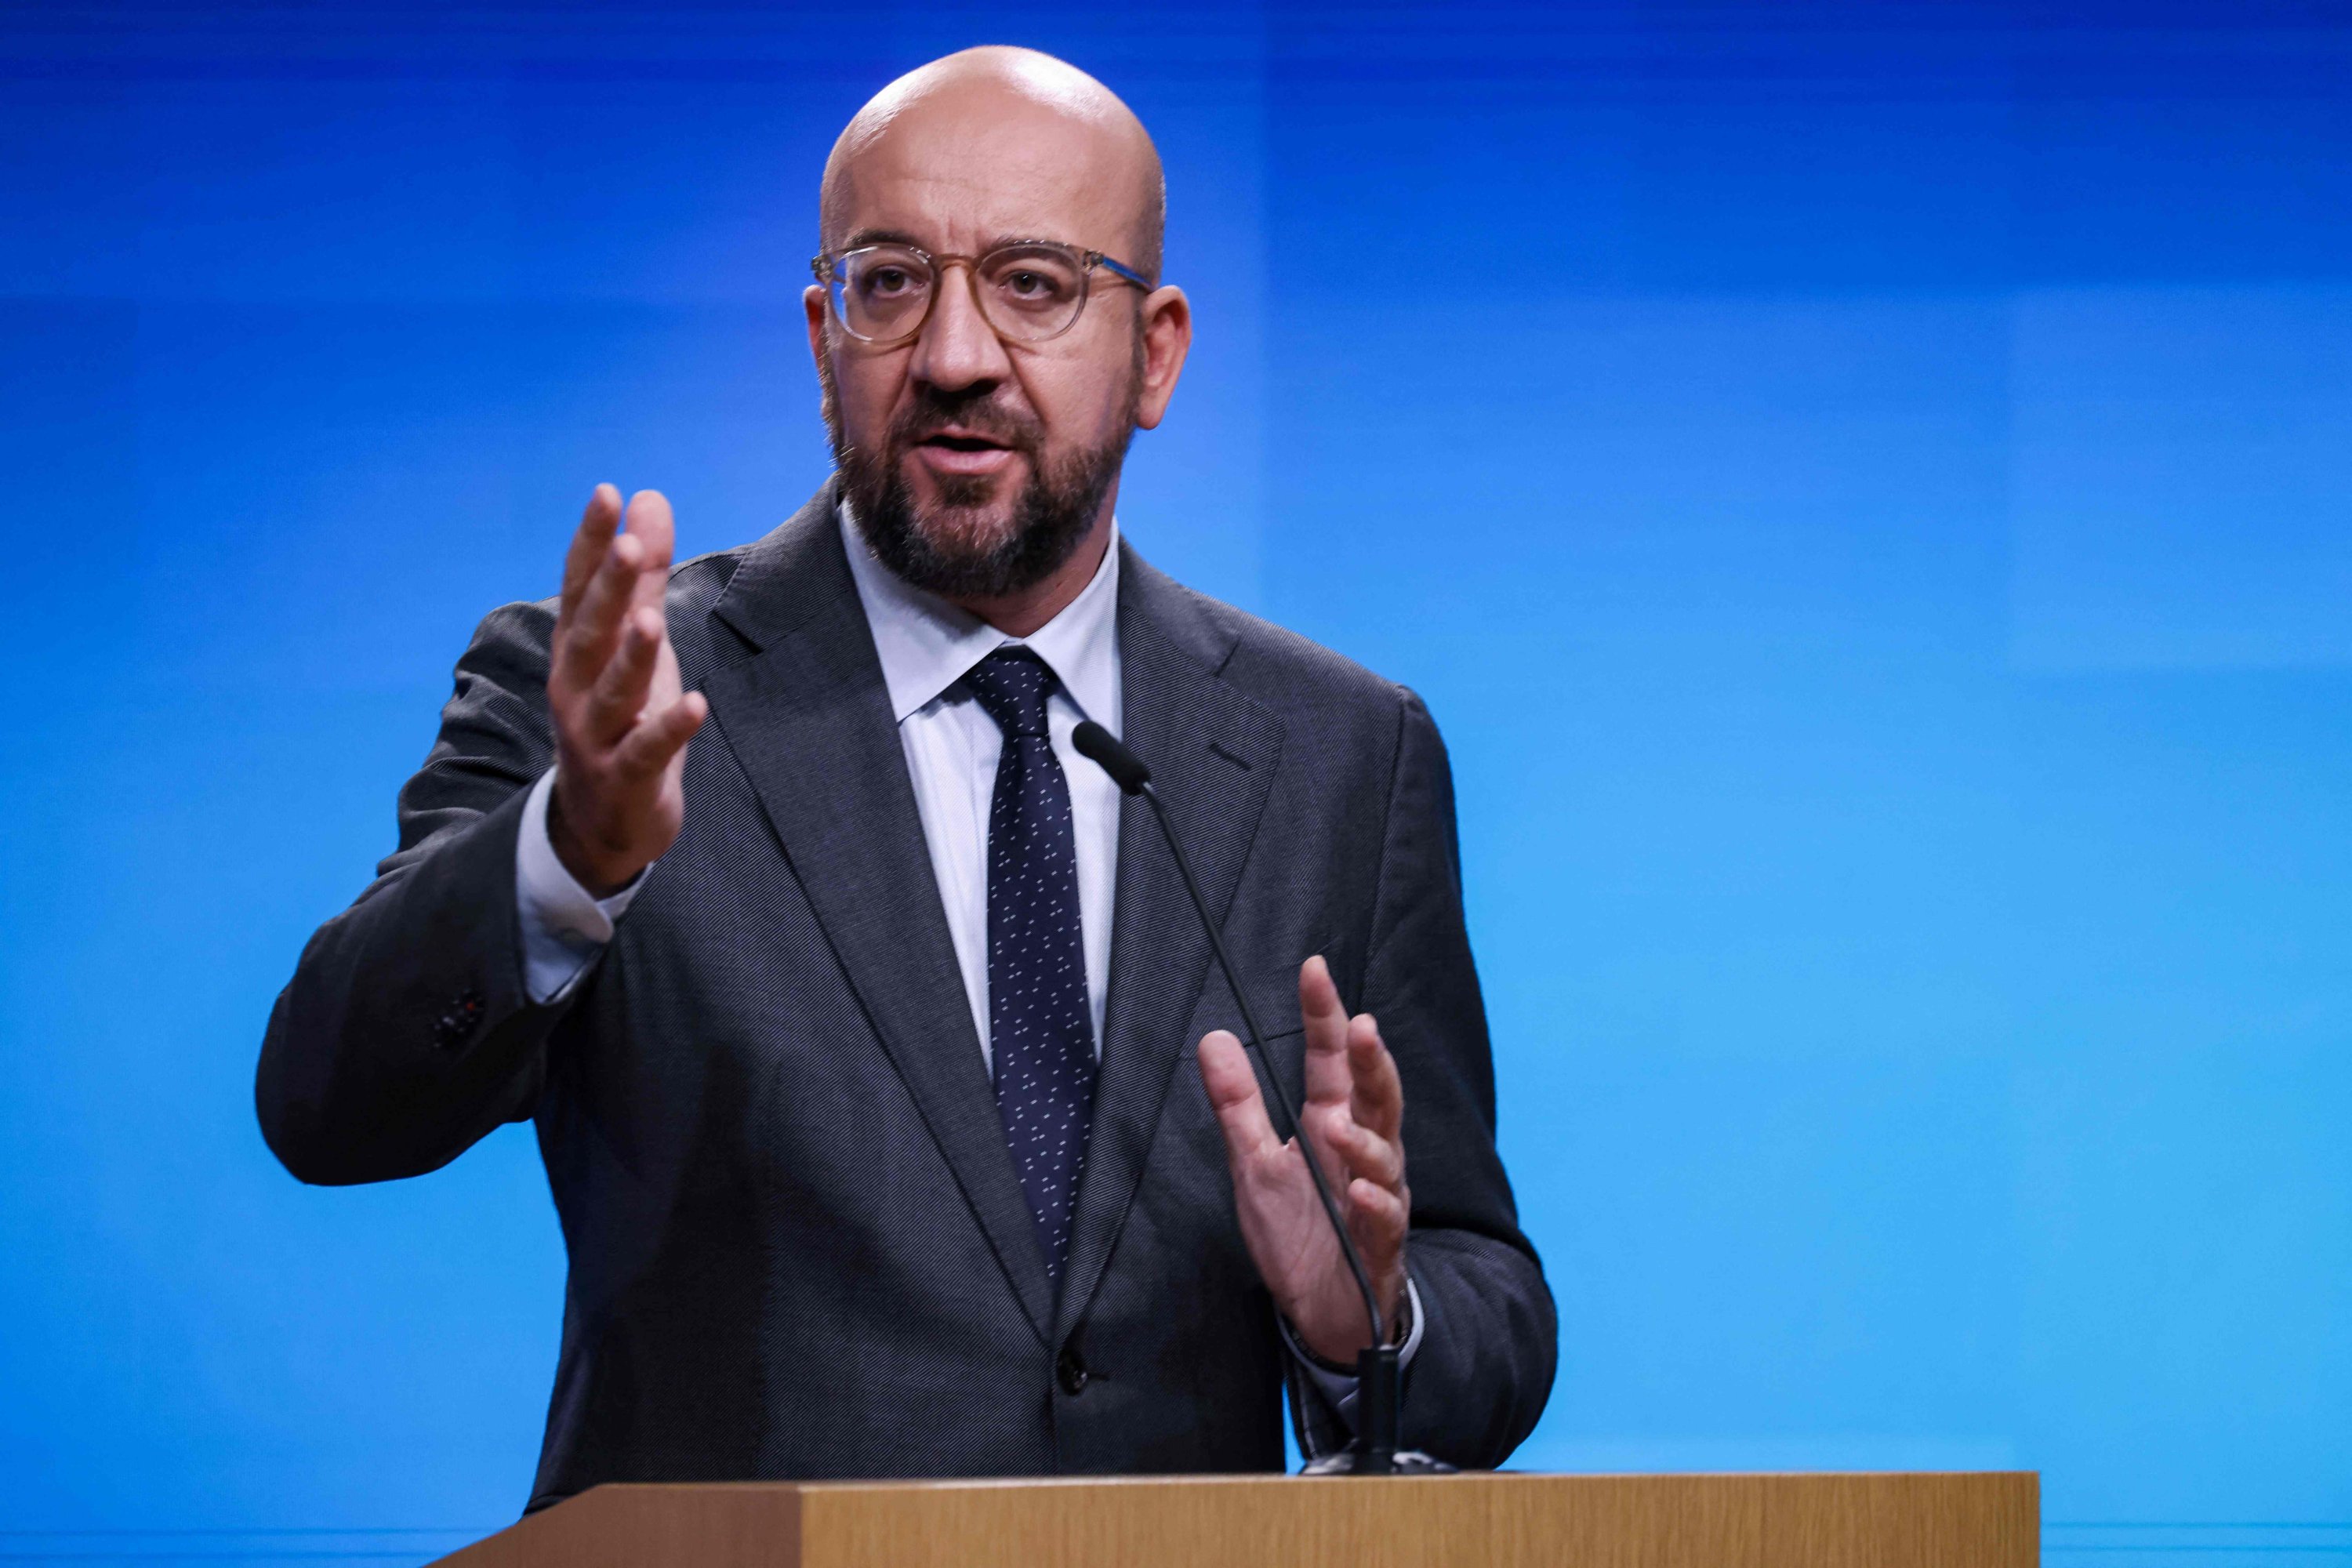 European Council President Charles Michel speaks during a press conference at the end of a virtual G-7 summit to discuss the crisis in Afghanistan at the European Council building in Brussels, Belgium, Aug. 24, 2021. (AFP Photo)